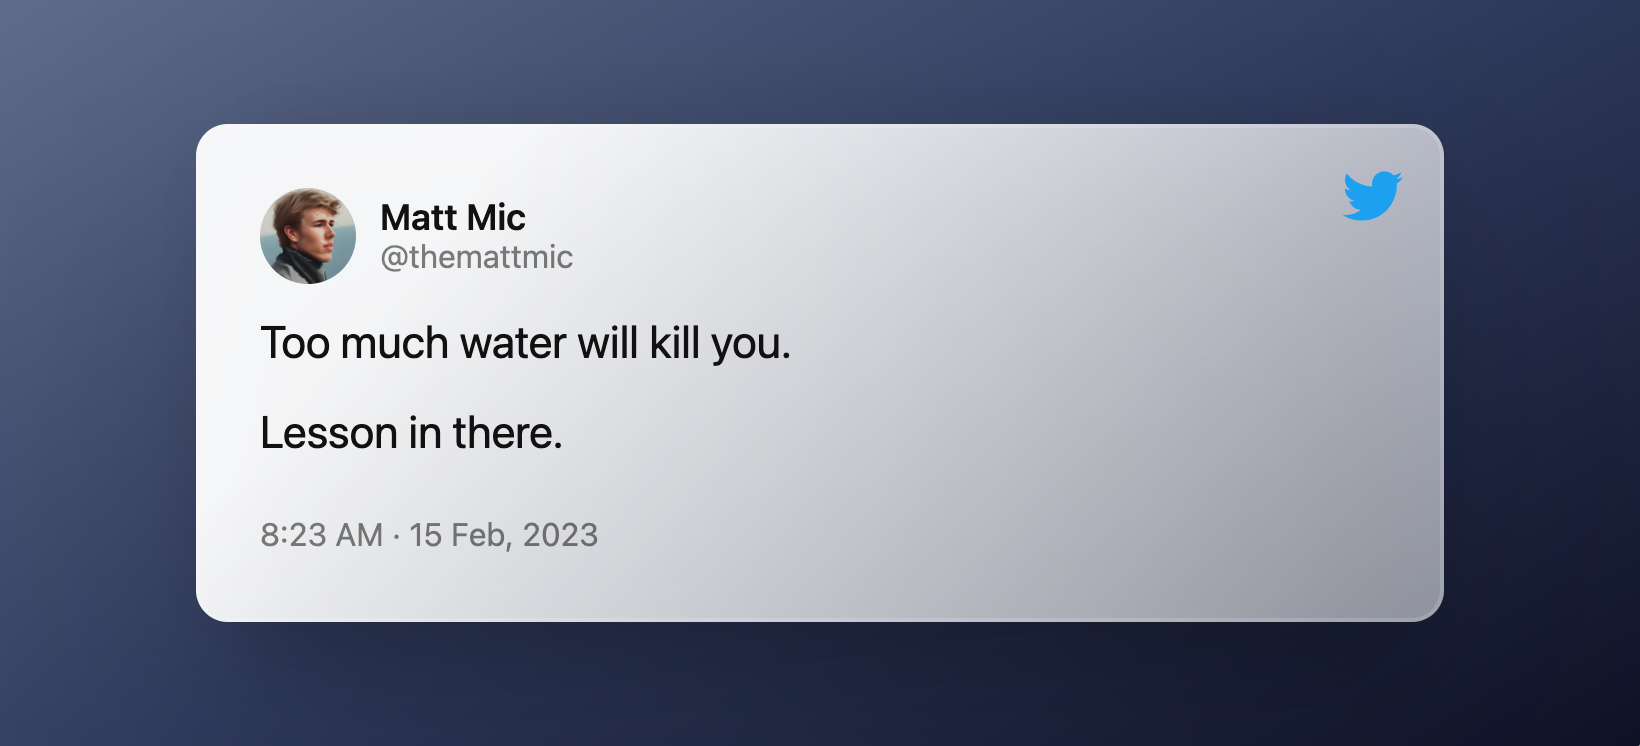 Too much water will kill you. Lesson in there.